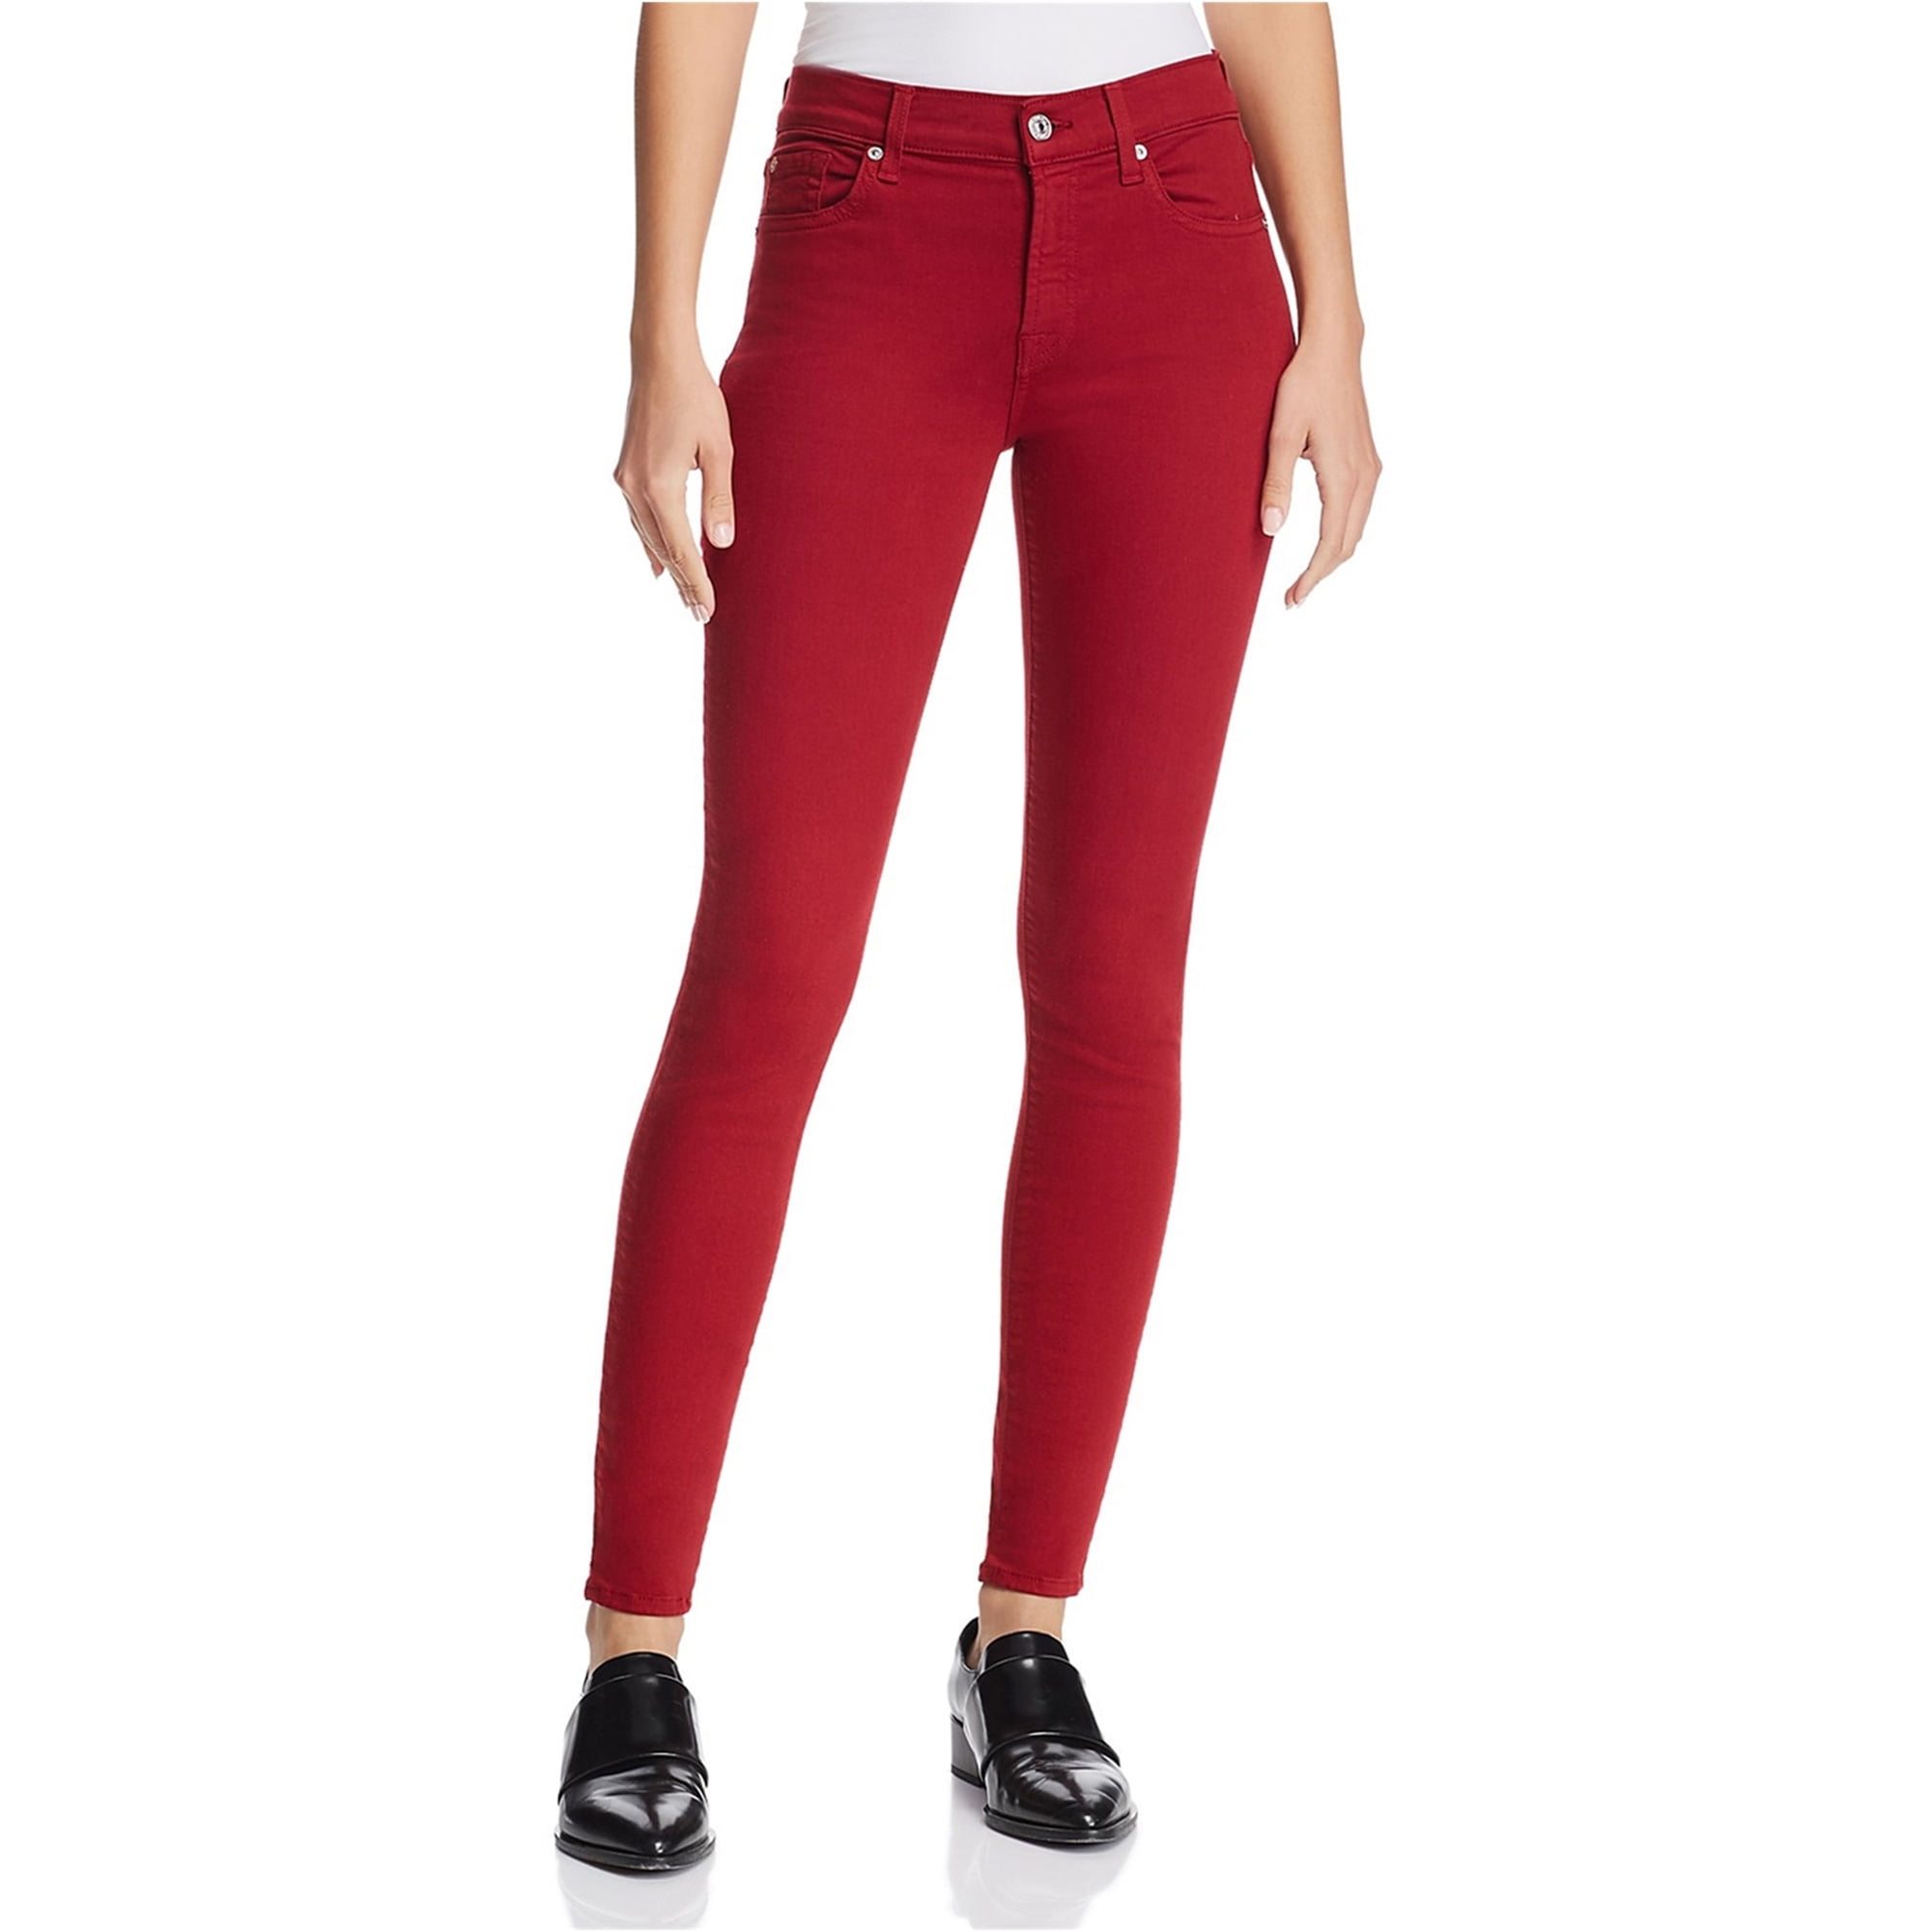 Cruelty had byld 7 For All ManKind Womens Coated Skinny Fit Jeans, Red, 25 - Walmart.com